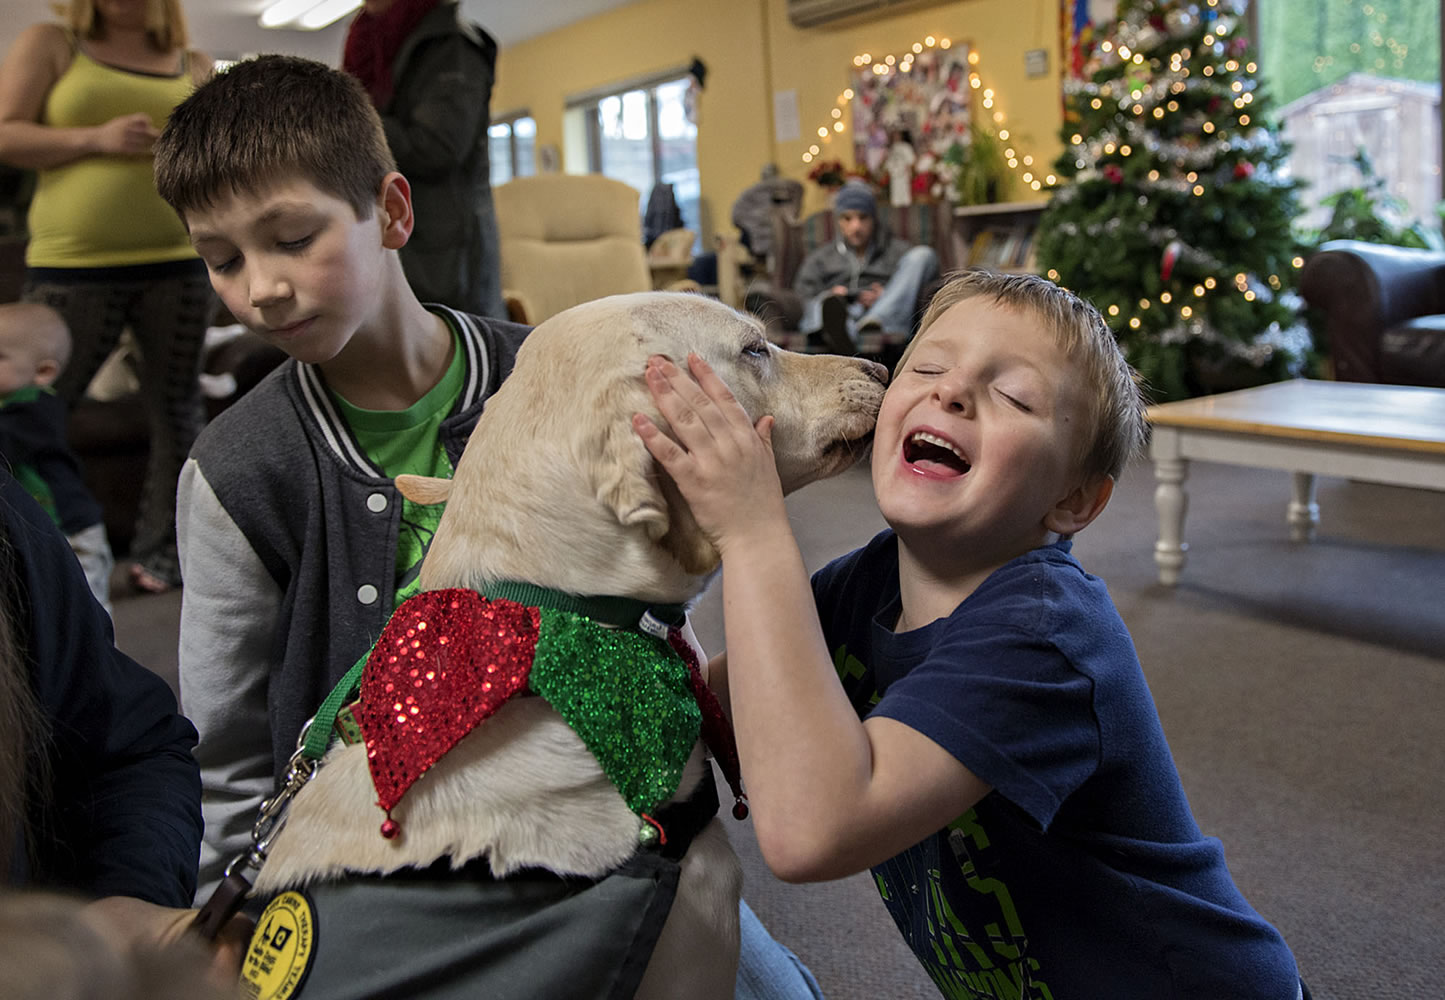 David Anderson, 11, left, pets Limon, a 4-year-old yellow Lab, as his brother, Joey, 6, gets a Christmas kiss on Christmas Eve at the Share Homestead homeless shelter in Hazel Dell.